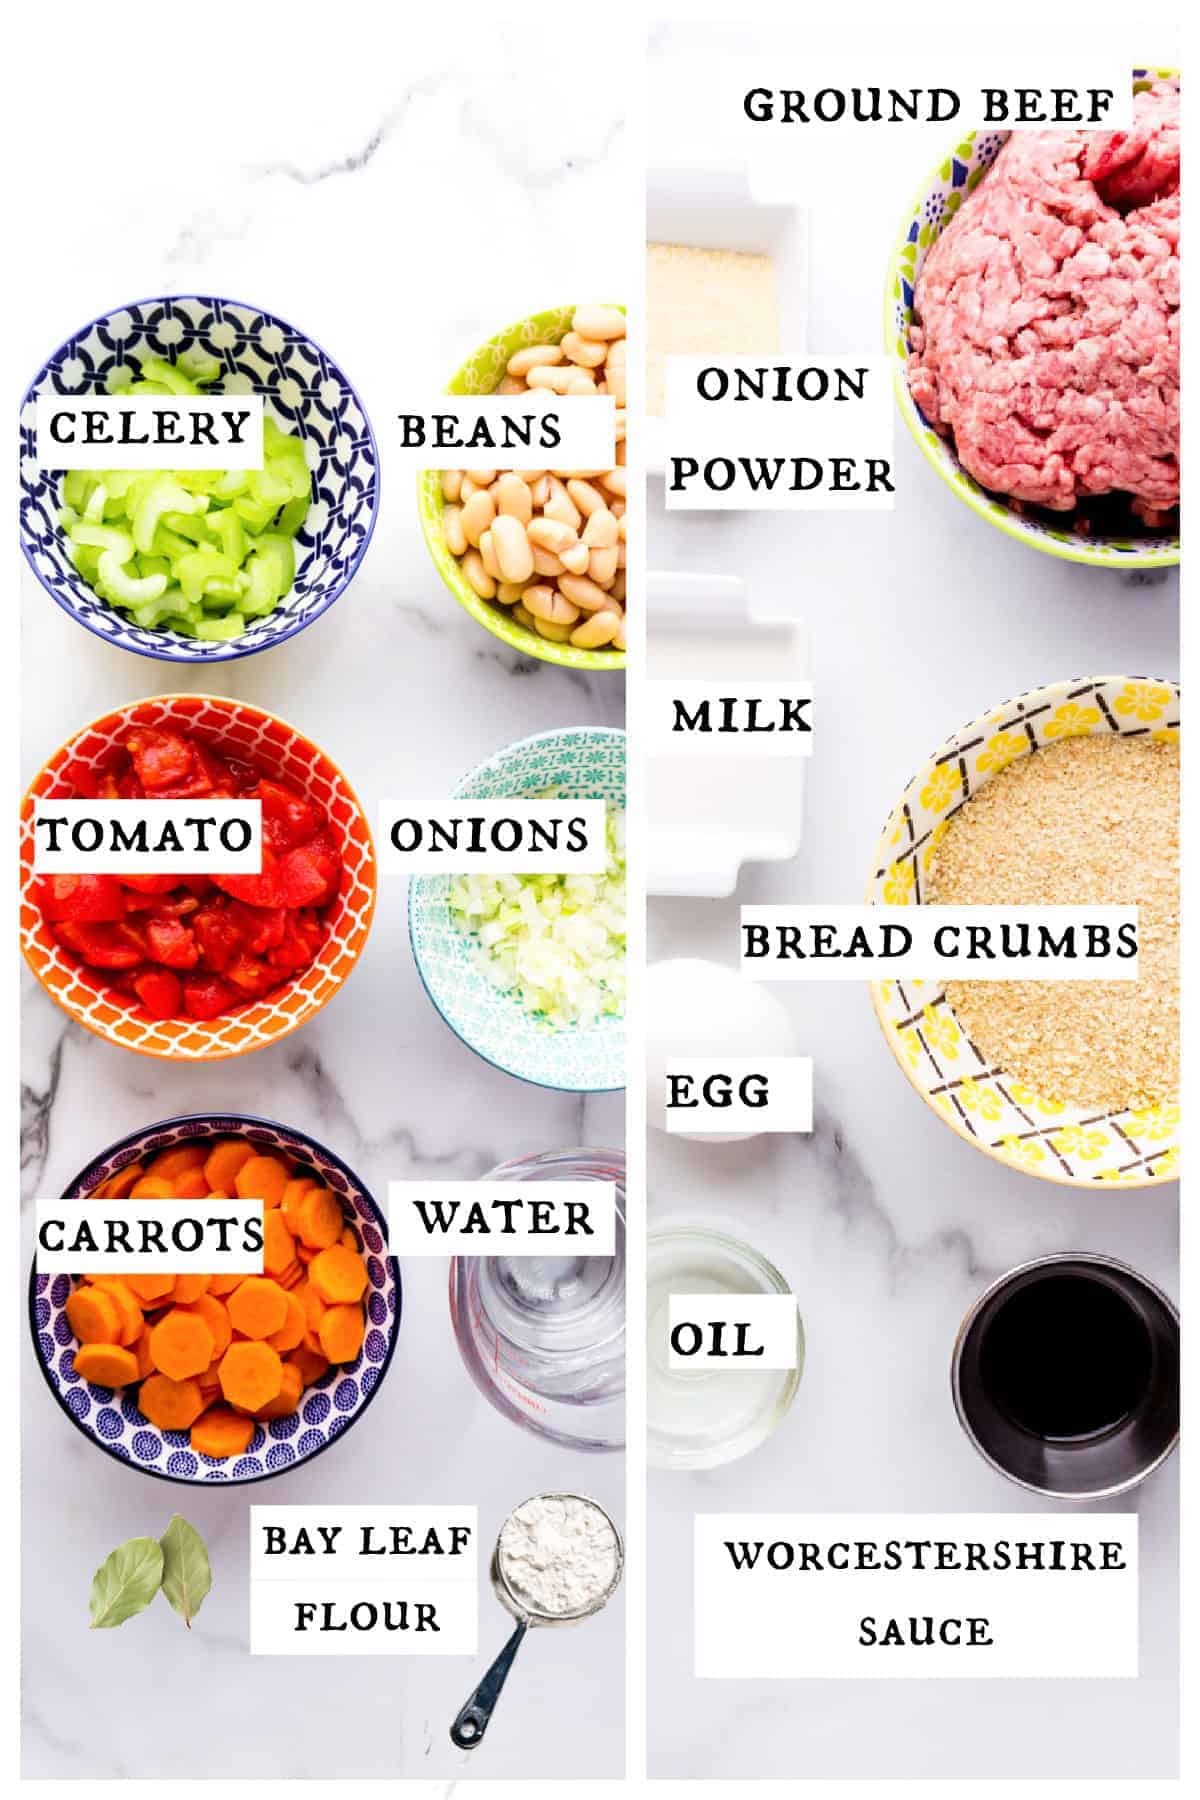 Ground beef, vegetables, and seasoning measure out in colorful bowls on marble countertop.